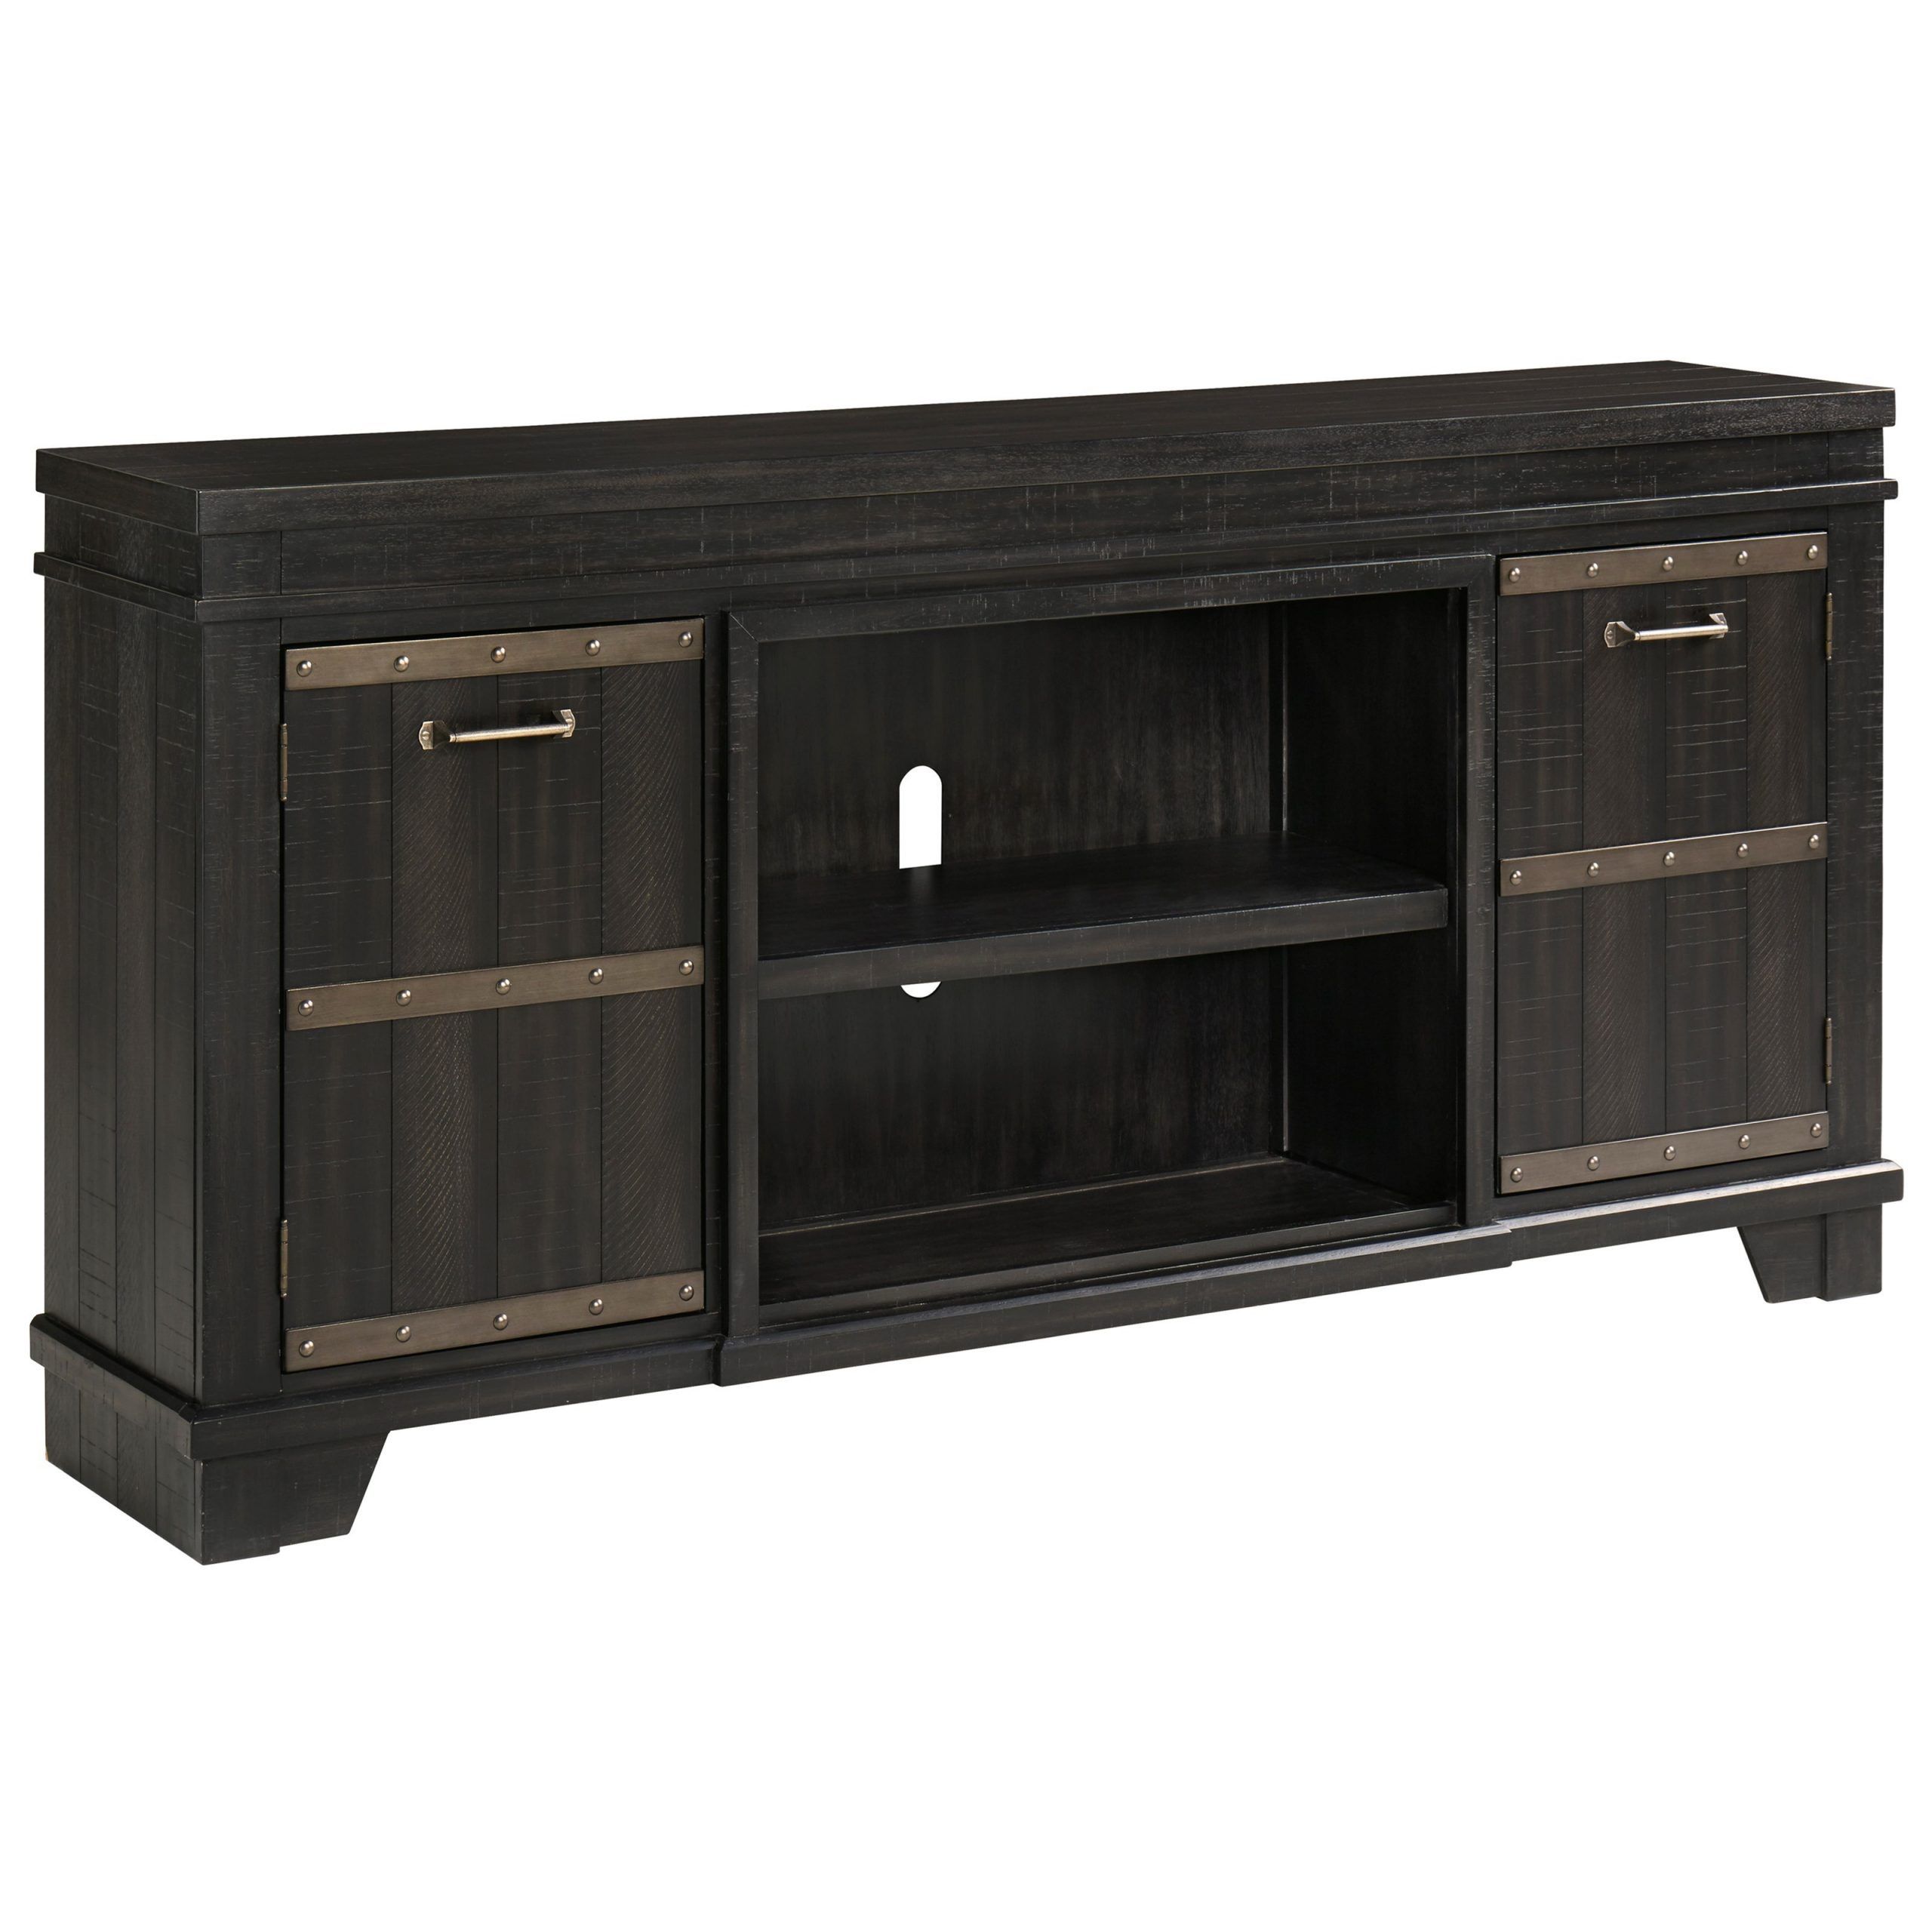 Signature Designashley Noorbrook Industrial Extra With Regard To Industrial Style Tv Stands (View 1 of 15)